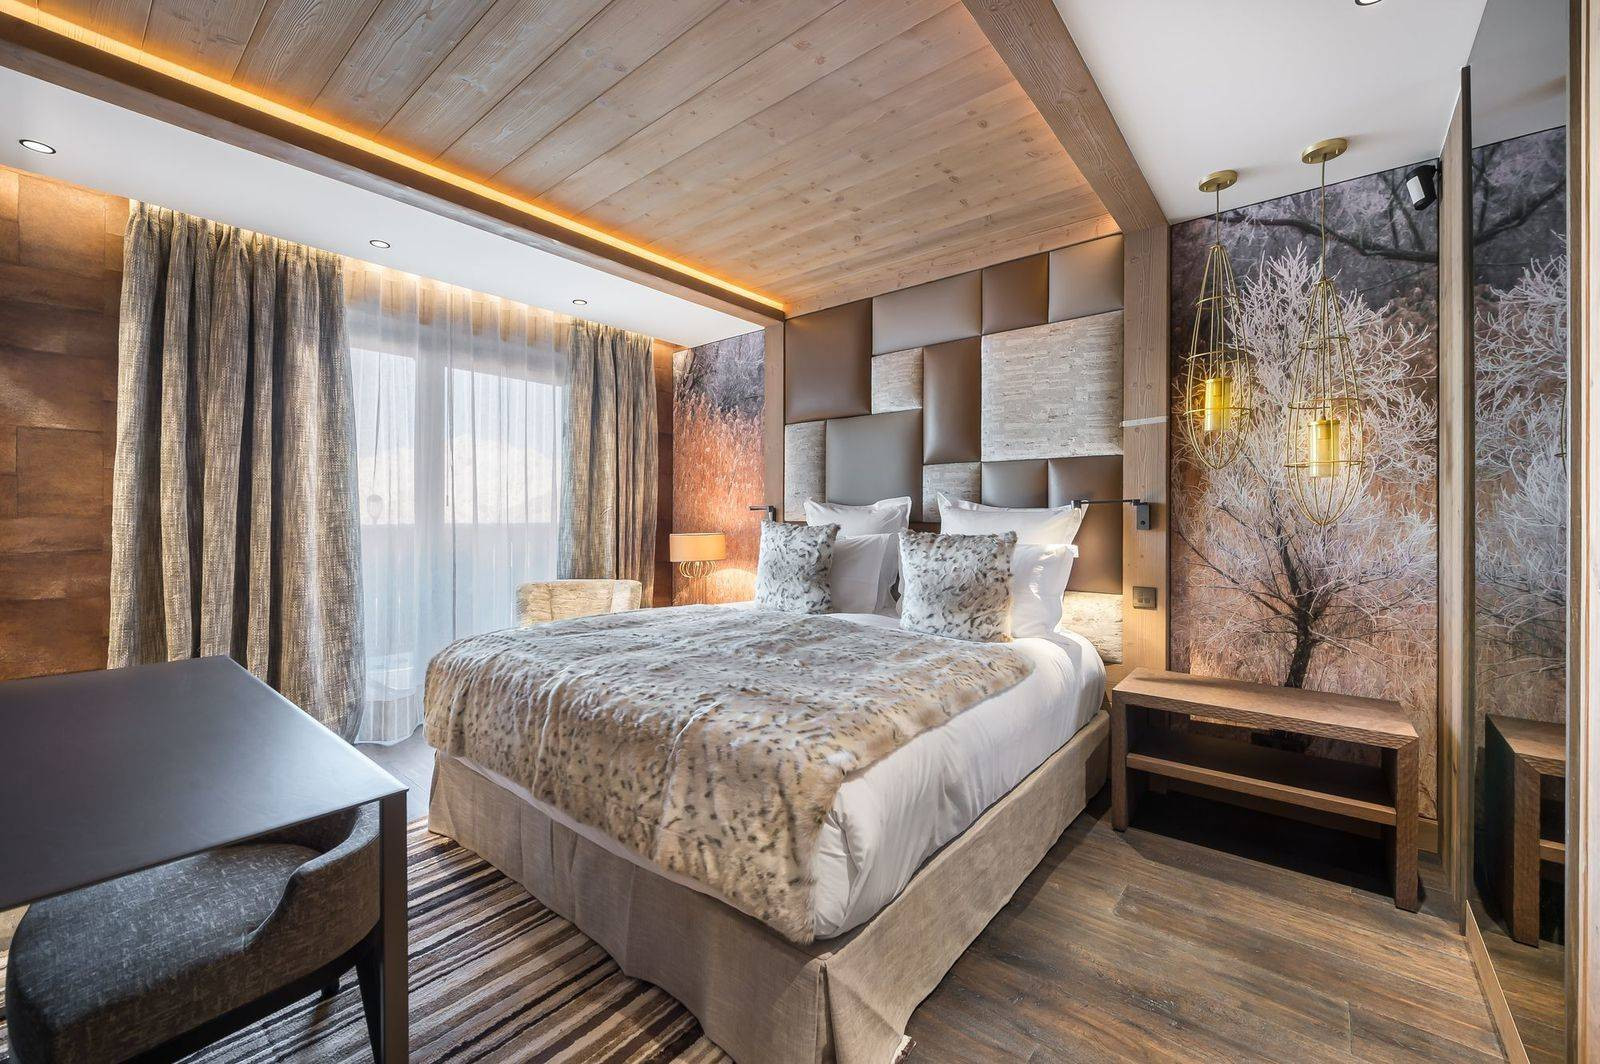 Courchevel 1850 Location Chalet Luxe Elaxane Chambre Beige 